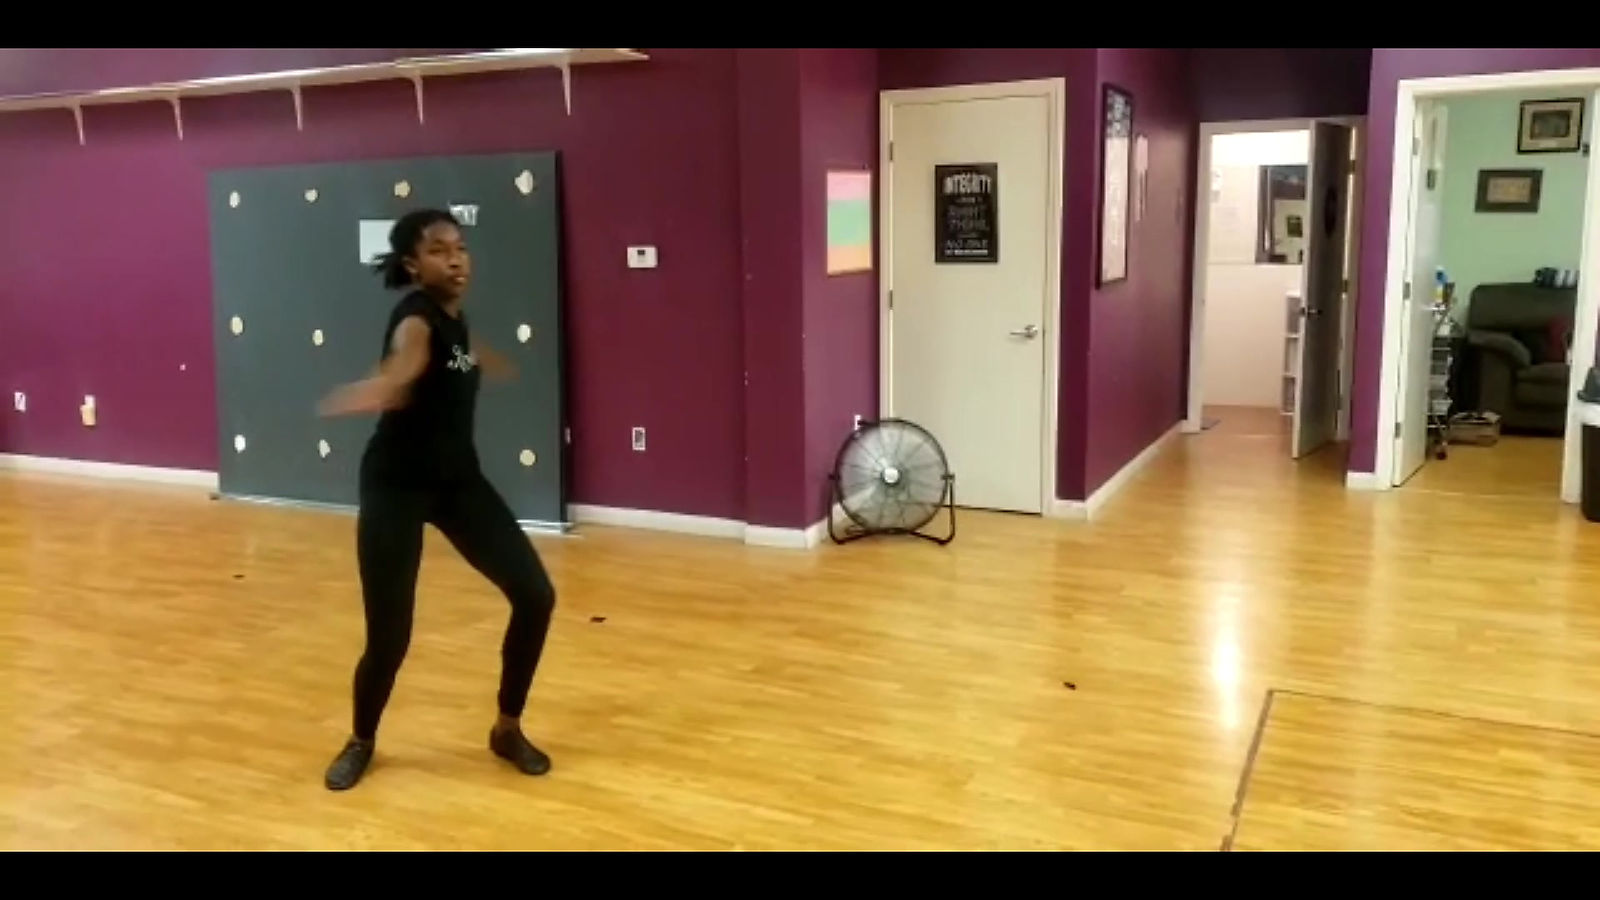 "Glam"- Jazz class taught by Crystal Lewis